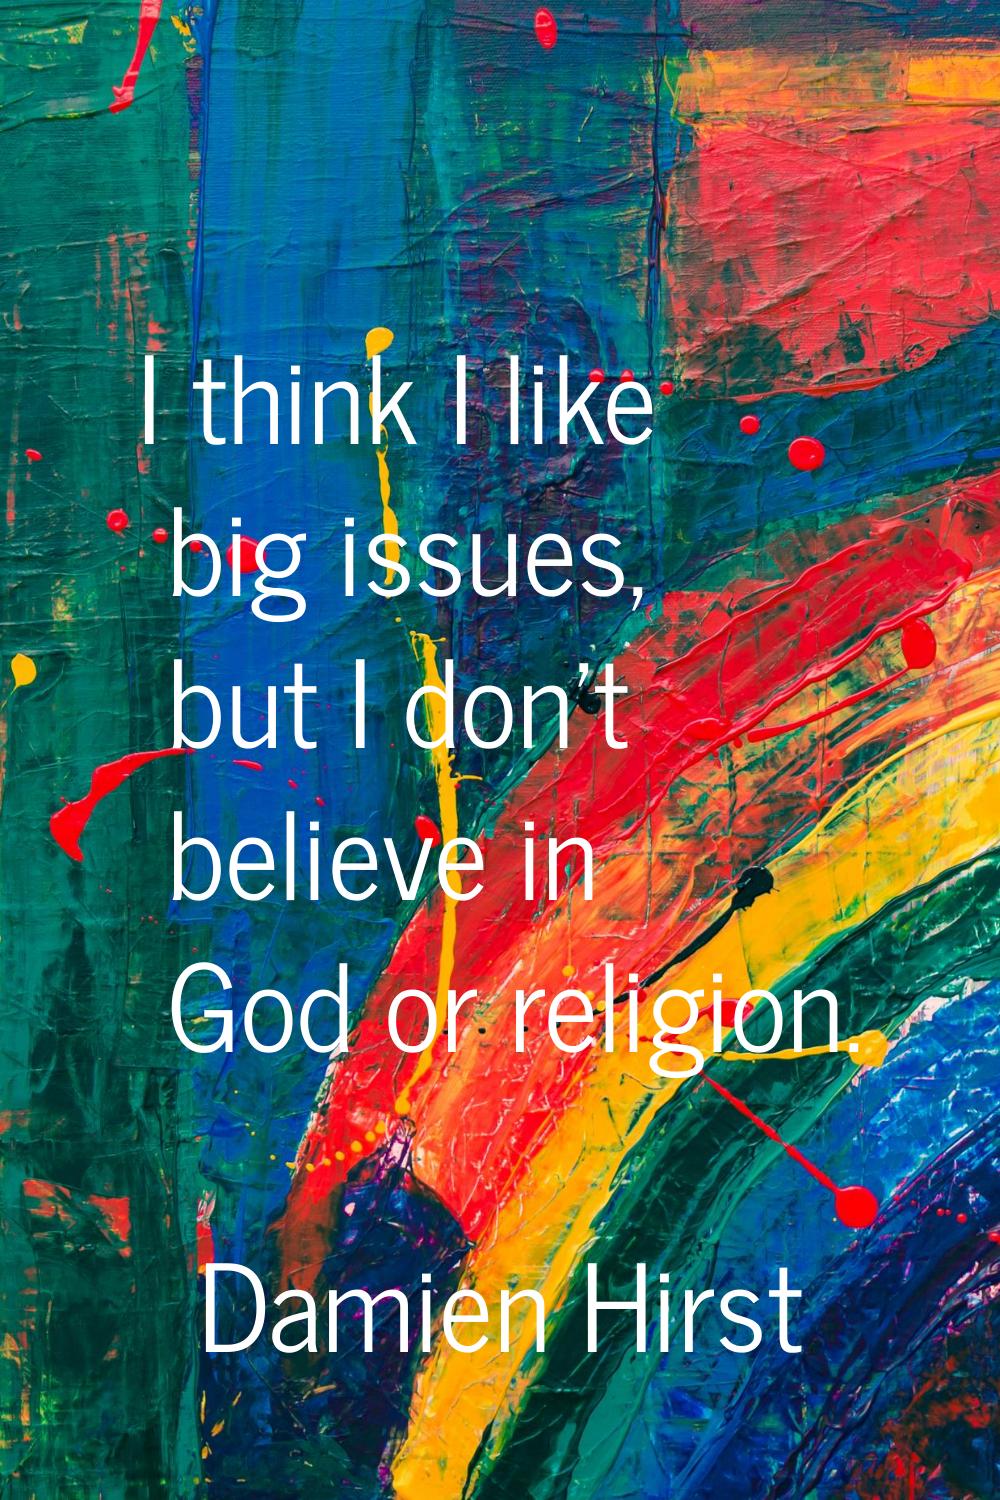 I think I like big issues, but I don't believe in God or religion.